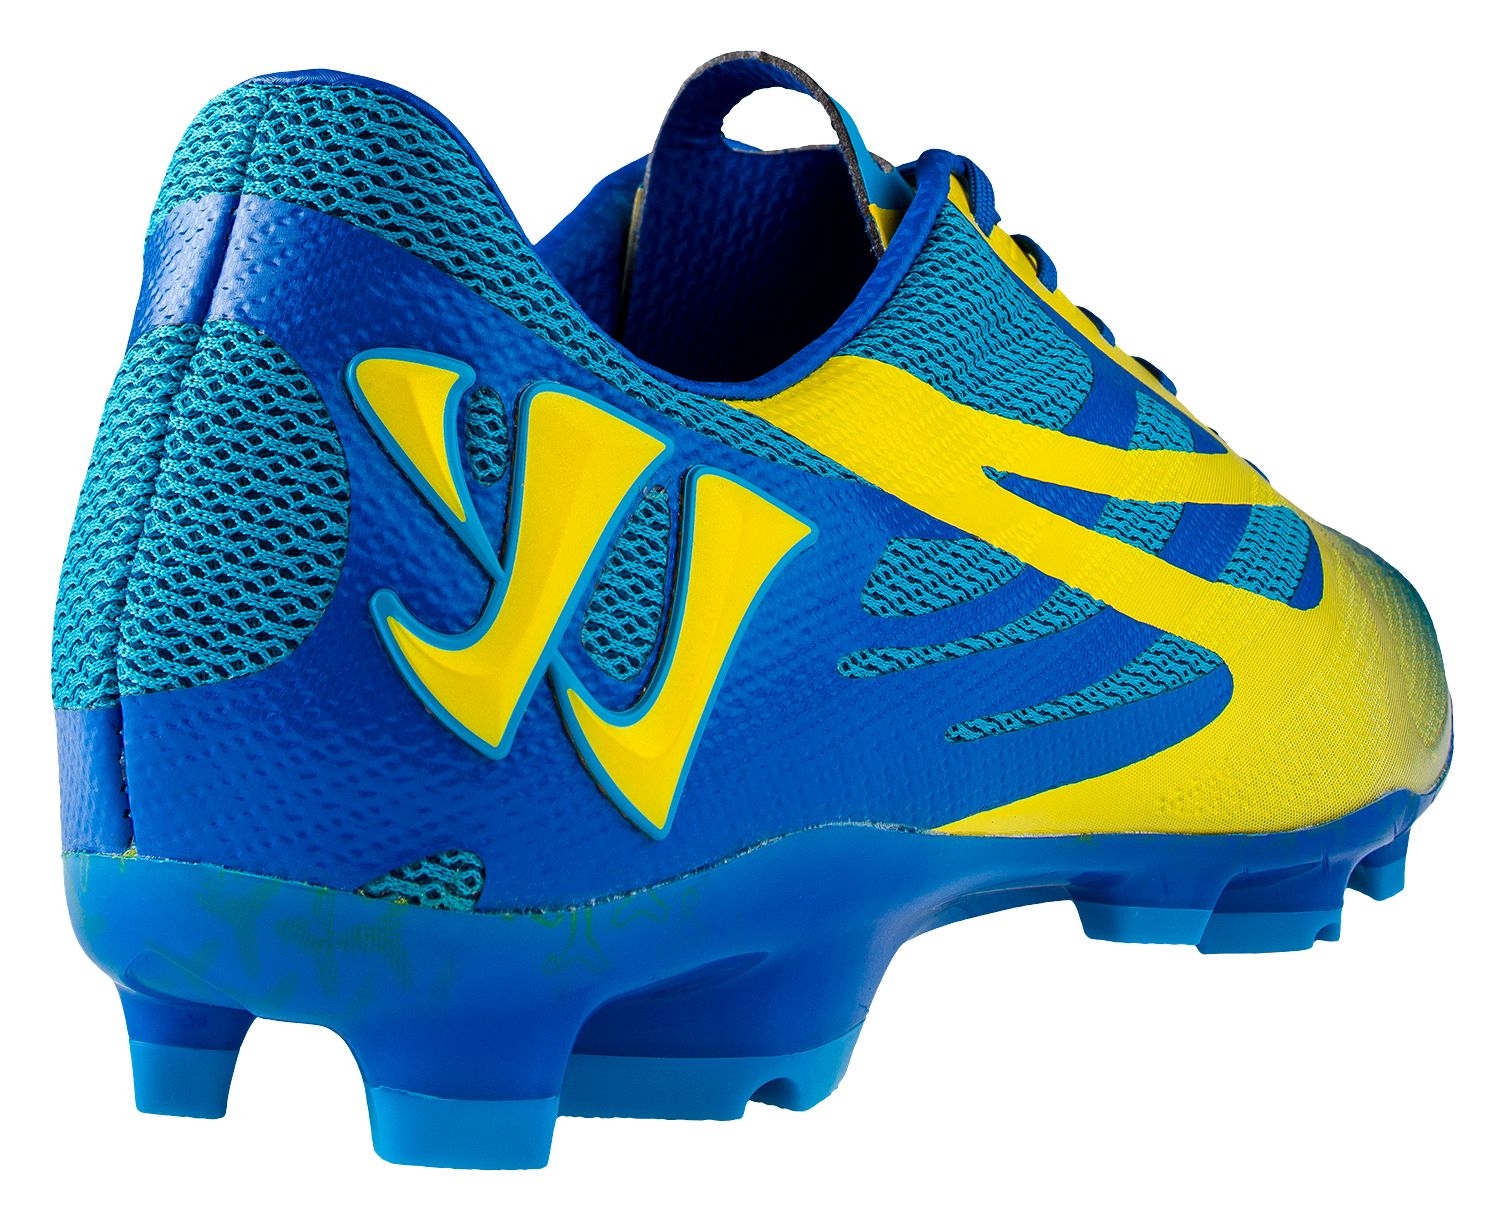 Superheat Pro FG, Vision Blue with Blue & Cyber Yellow image number 4